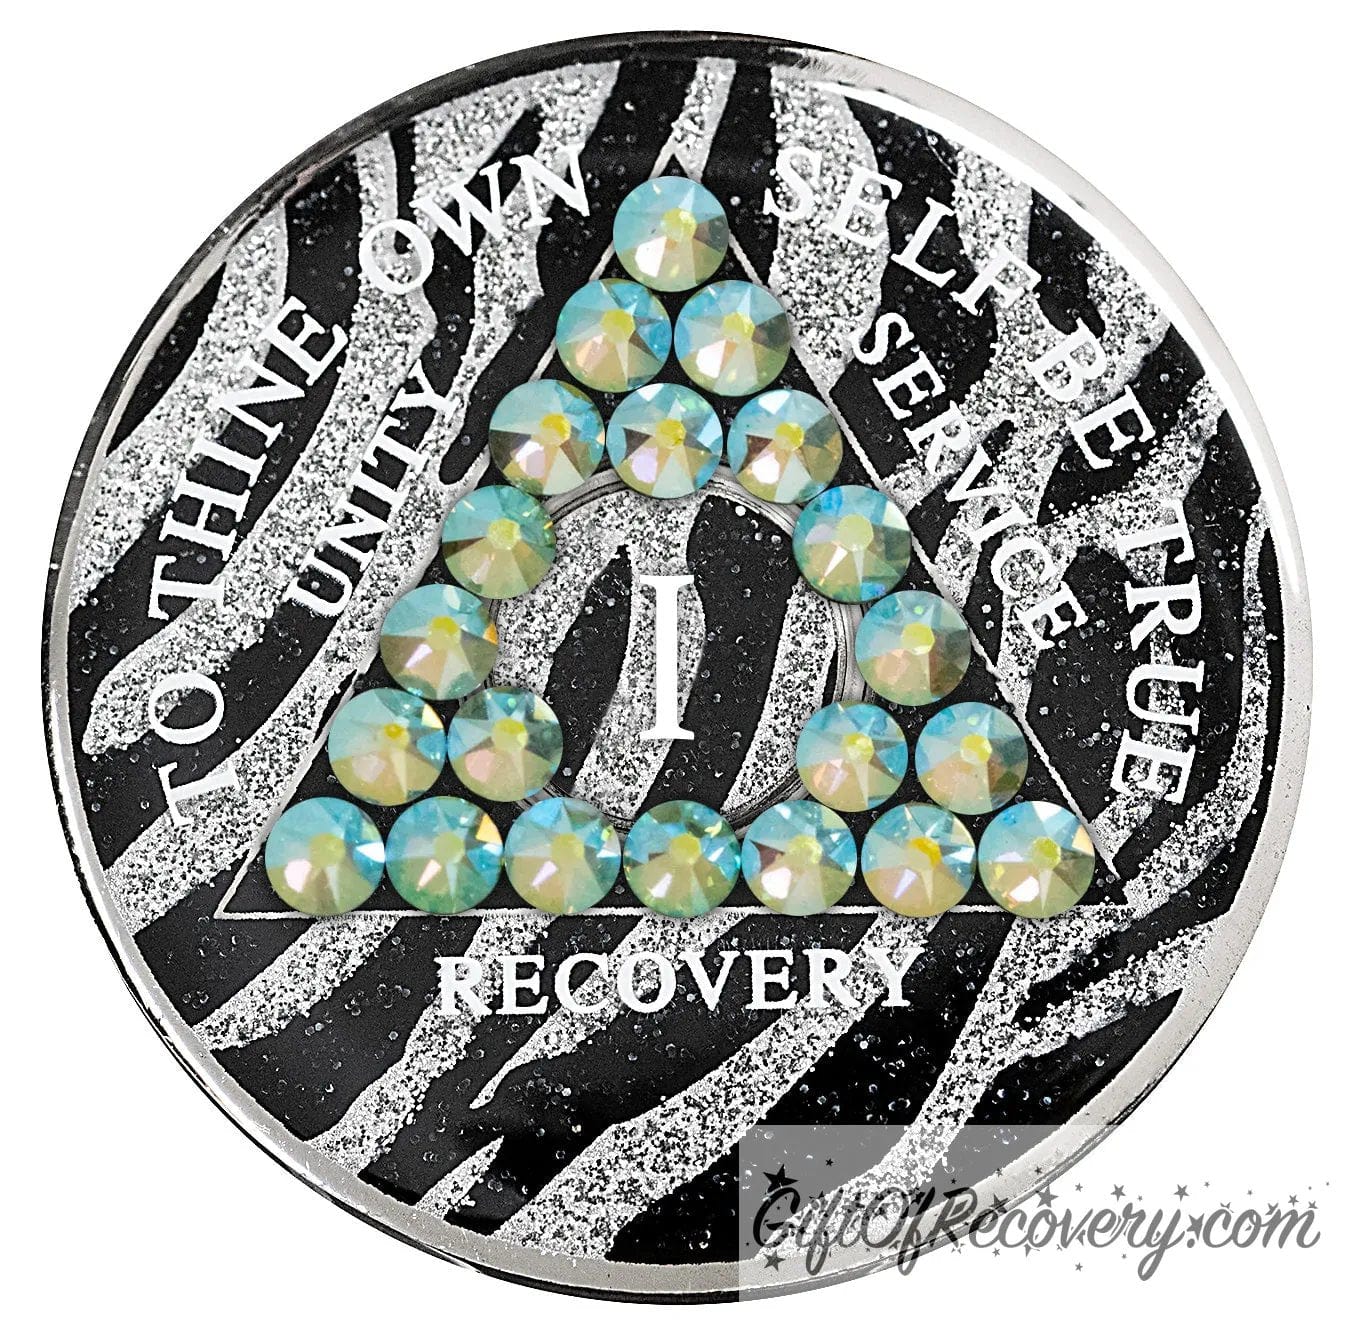 1 year Zebra glitter style AA medallion with 21 genuine peridot crystals, AA moto, unity, service, recovery, and roman numeral are in white and blend into the pattern, so you can let your recovery shine, not your time, the outer rim is silver plated, sealed in a high-quality, chip and scratch-resistant resin dome giving it a beautiful glossy look that will last.